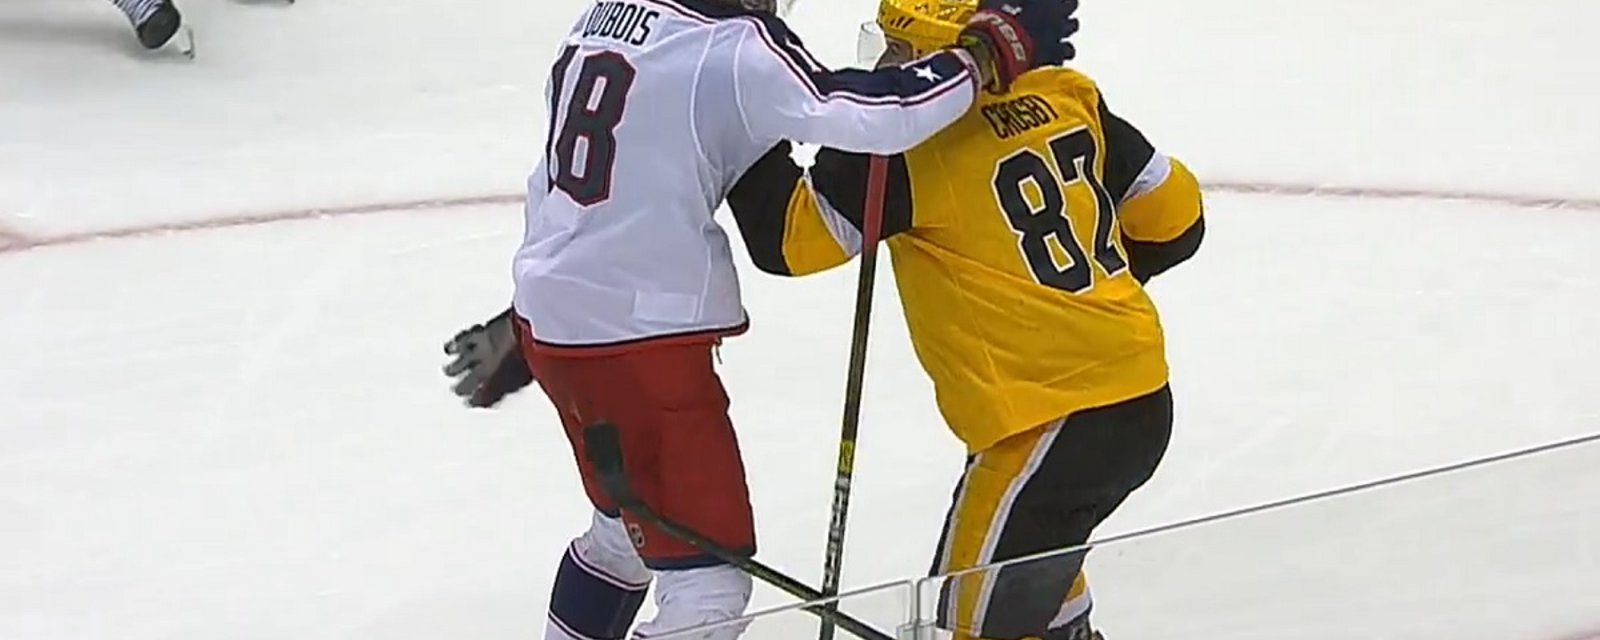 Sidney Crosby drops the gloves with Pierre-Luc Dubois on Saturday night!